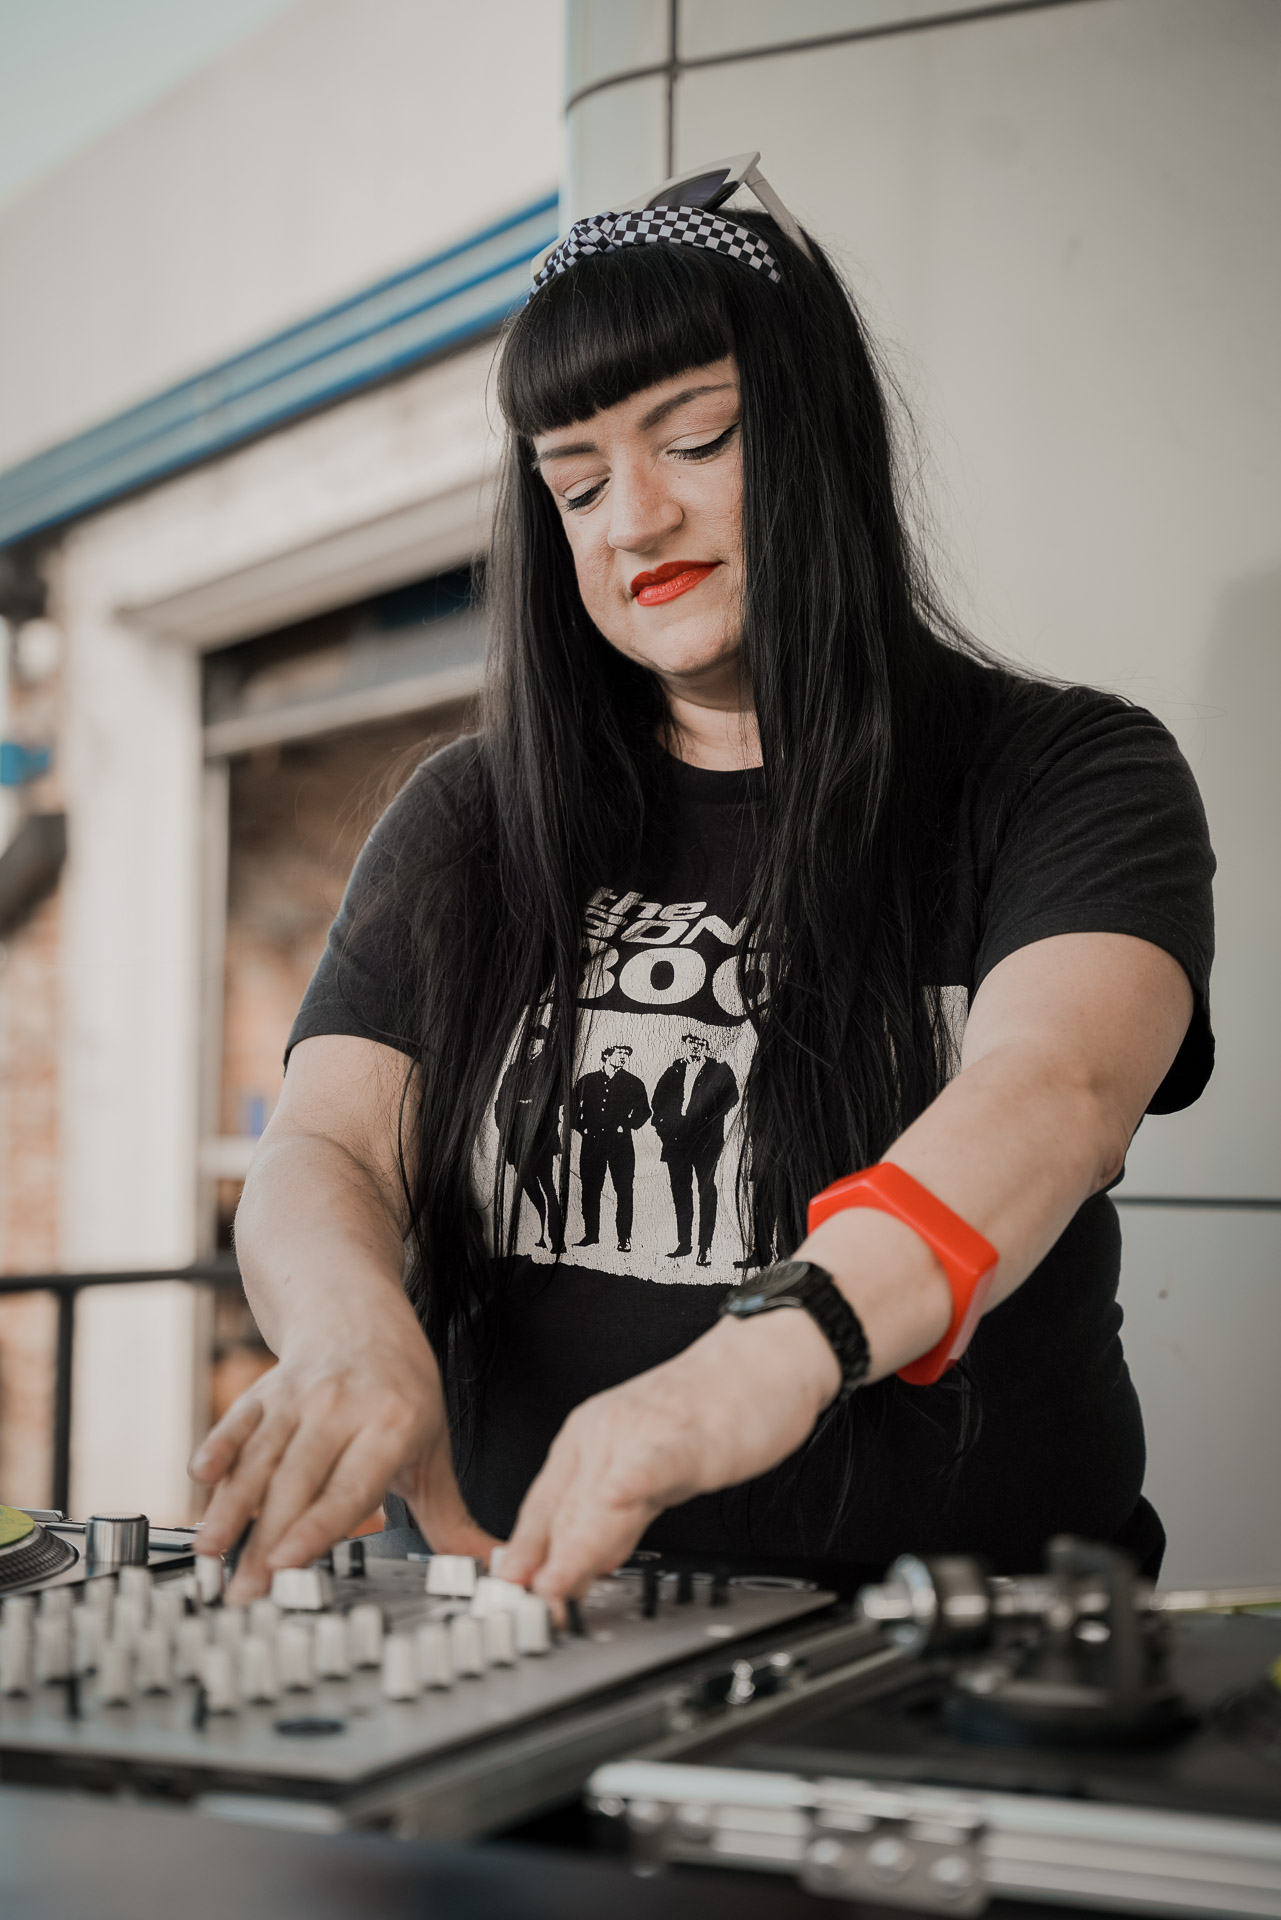 A person deejaying